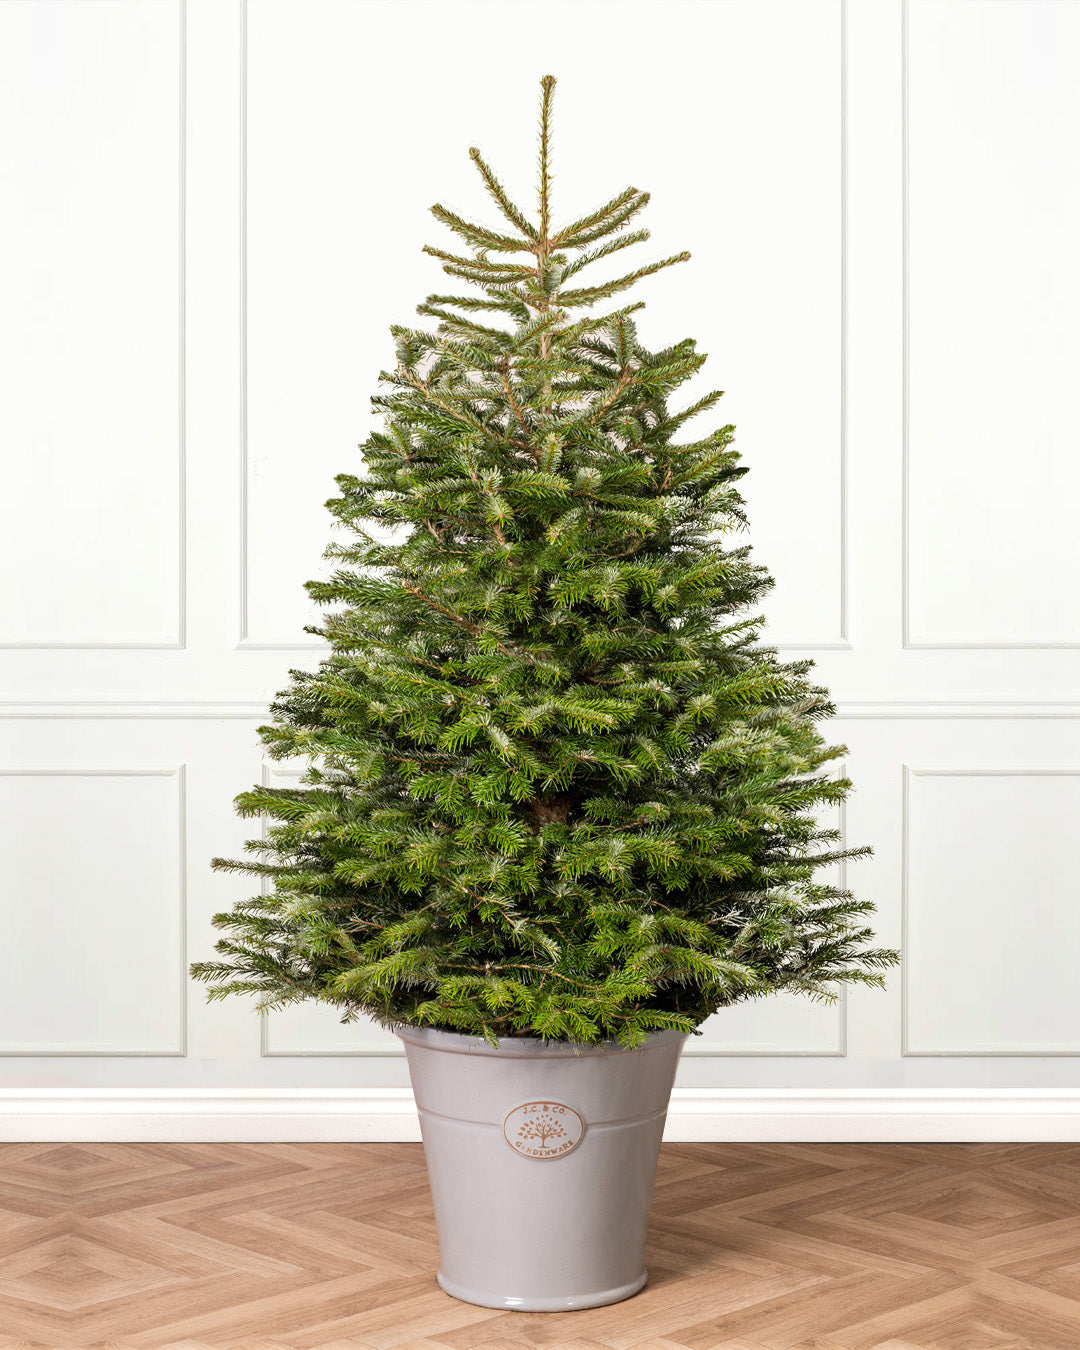 Live & Real Potted Christmas Trees